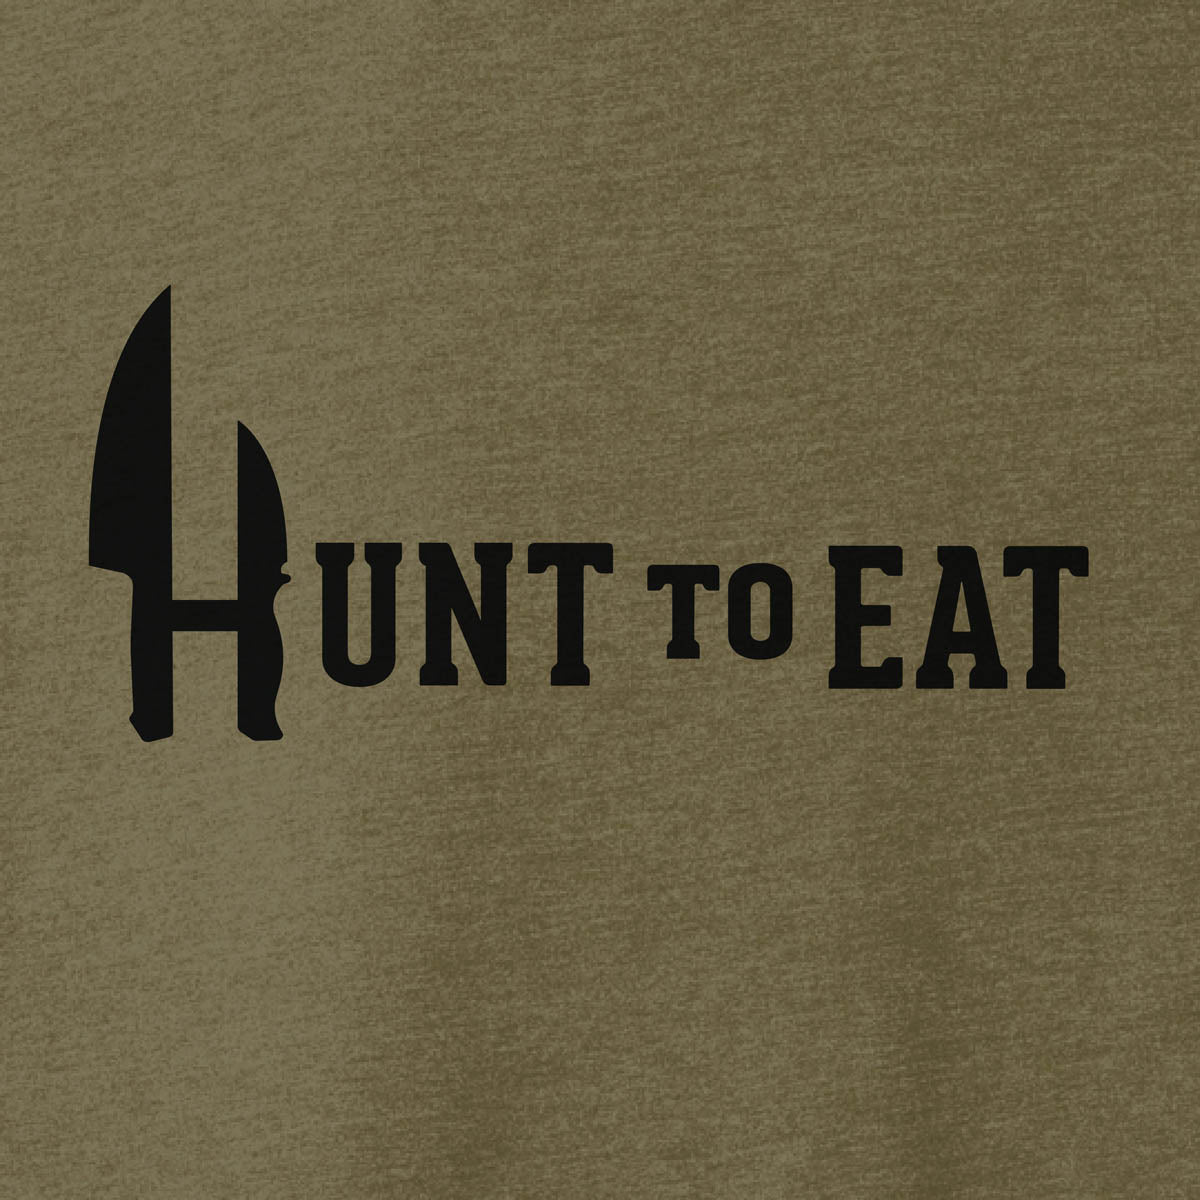 Logowear featuring a Hunt To Eat logo on a Military green T-shirt